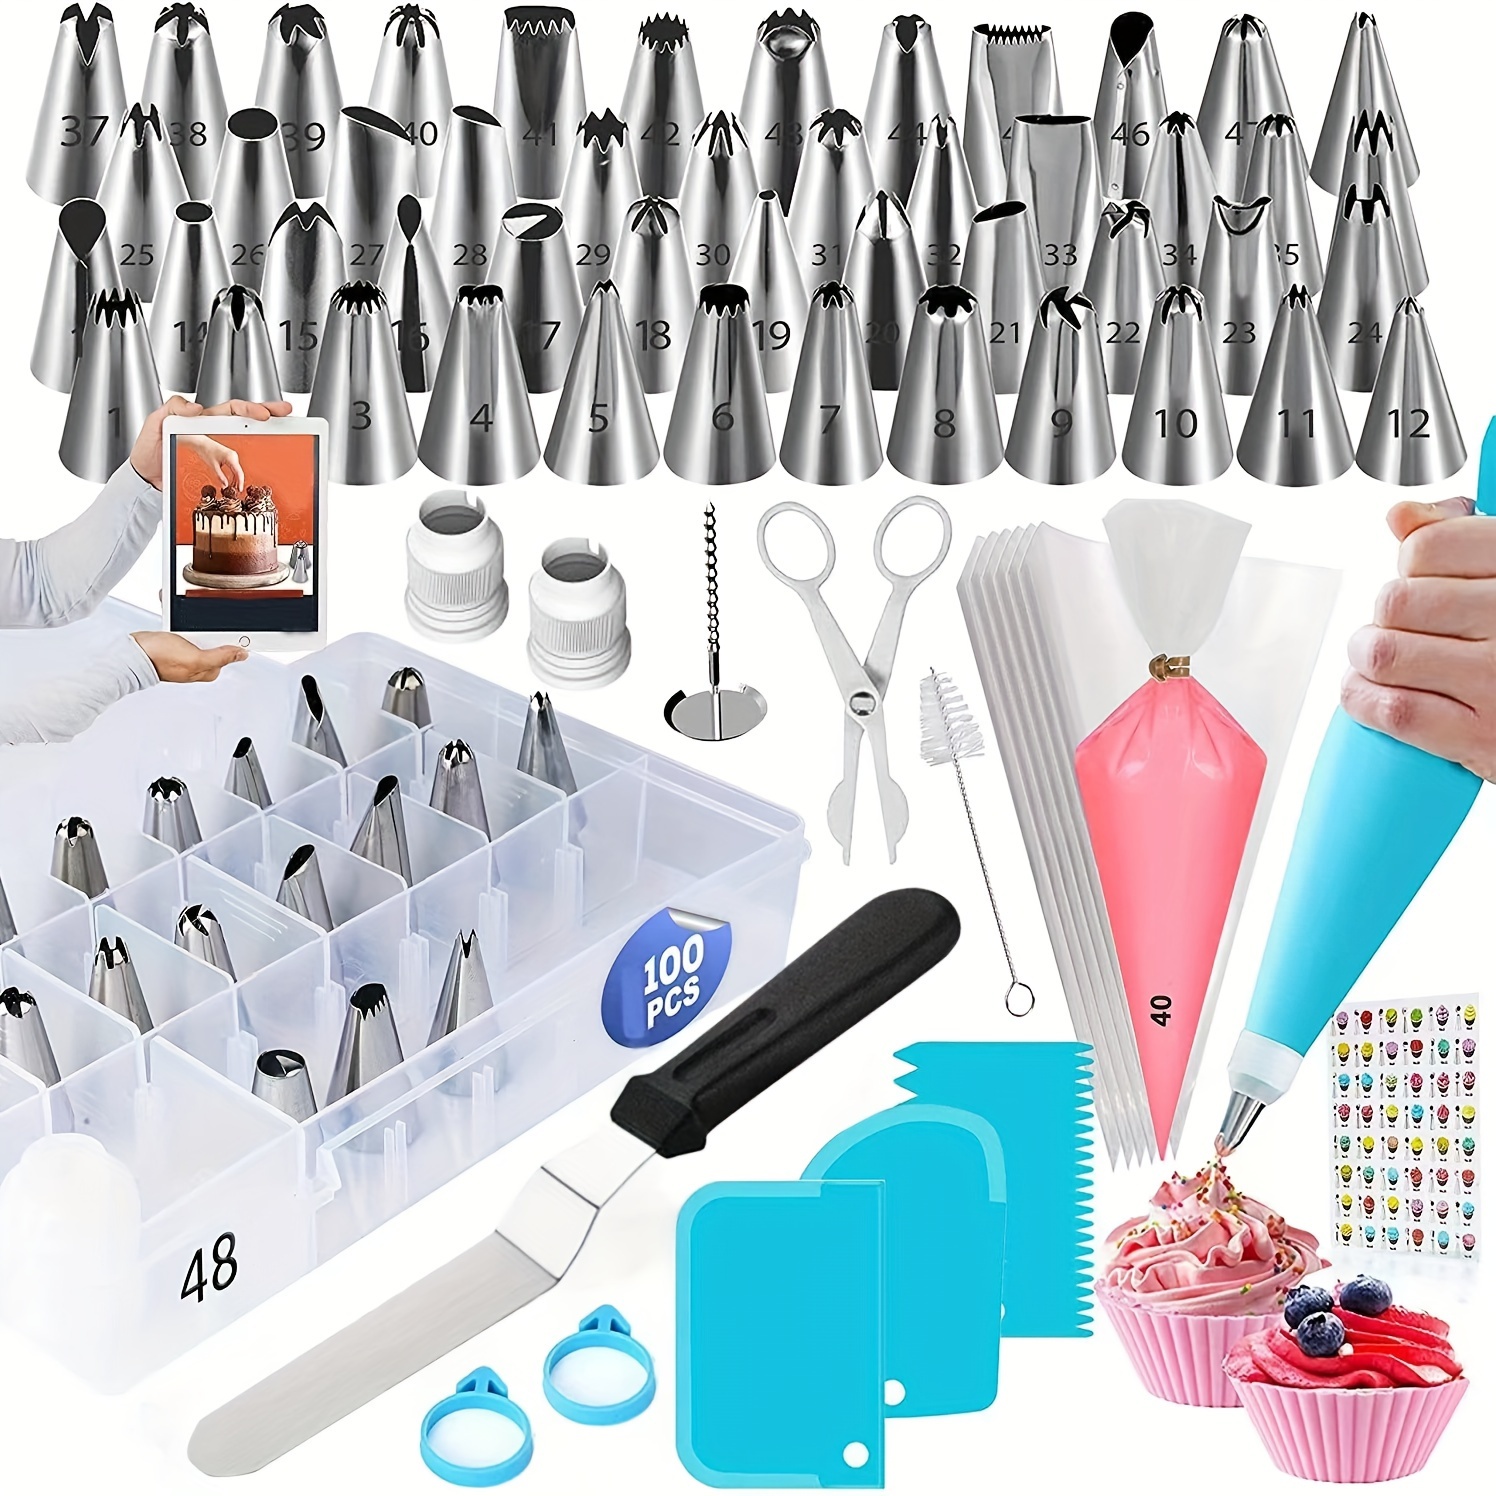 

100pcs/set Cake Decorating Set, Piping Icing Decoration Kit, Disposable Piping Bag, Silicone Pastry Bags, Icing Tips, Angled Spatula, Smoother Scraper, Diy Cake Decorations, Baking Tools